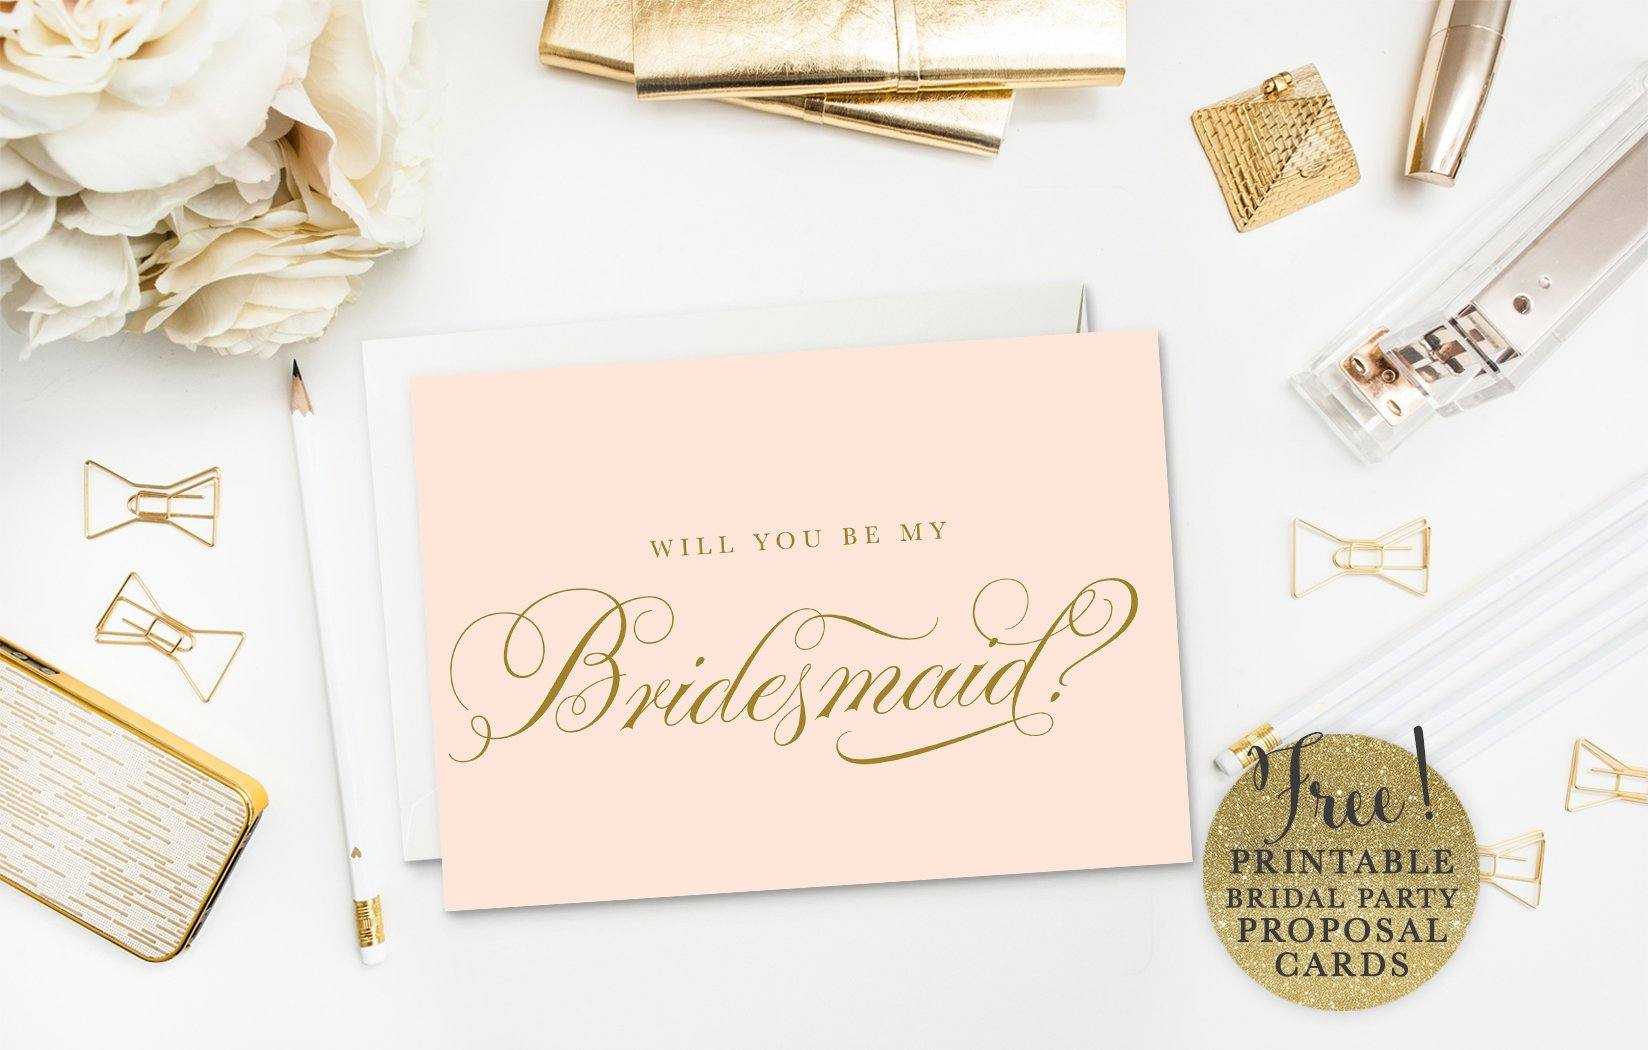 10 Will You Be My Bridesmaid? Cards (Free & Printable) Regarding Will You Be My Bridesmaid Card Template